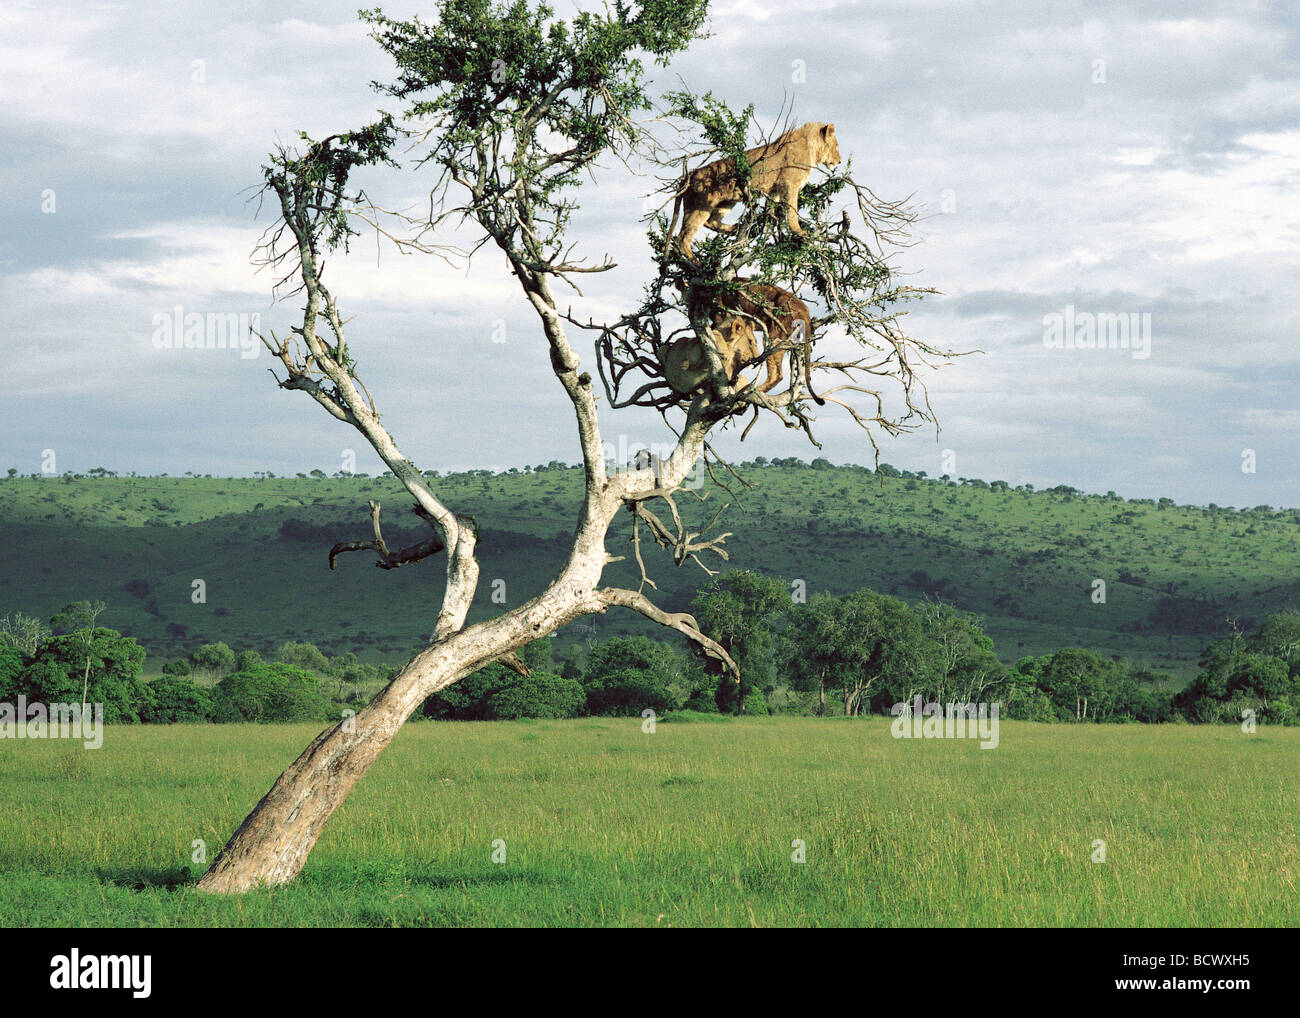 Three tree climbing lions high in the branches of old balanites tree Masai Mara National Reserve Kenya East Africa Stock Photo